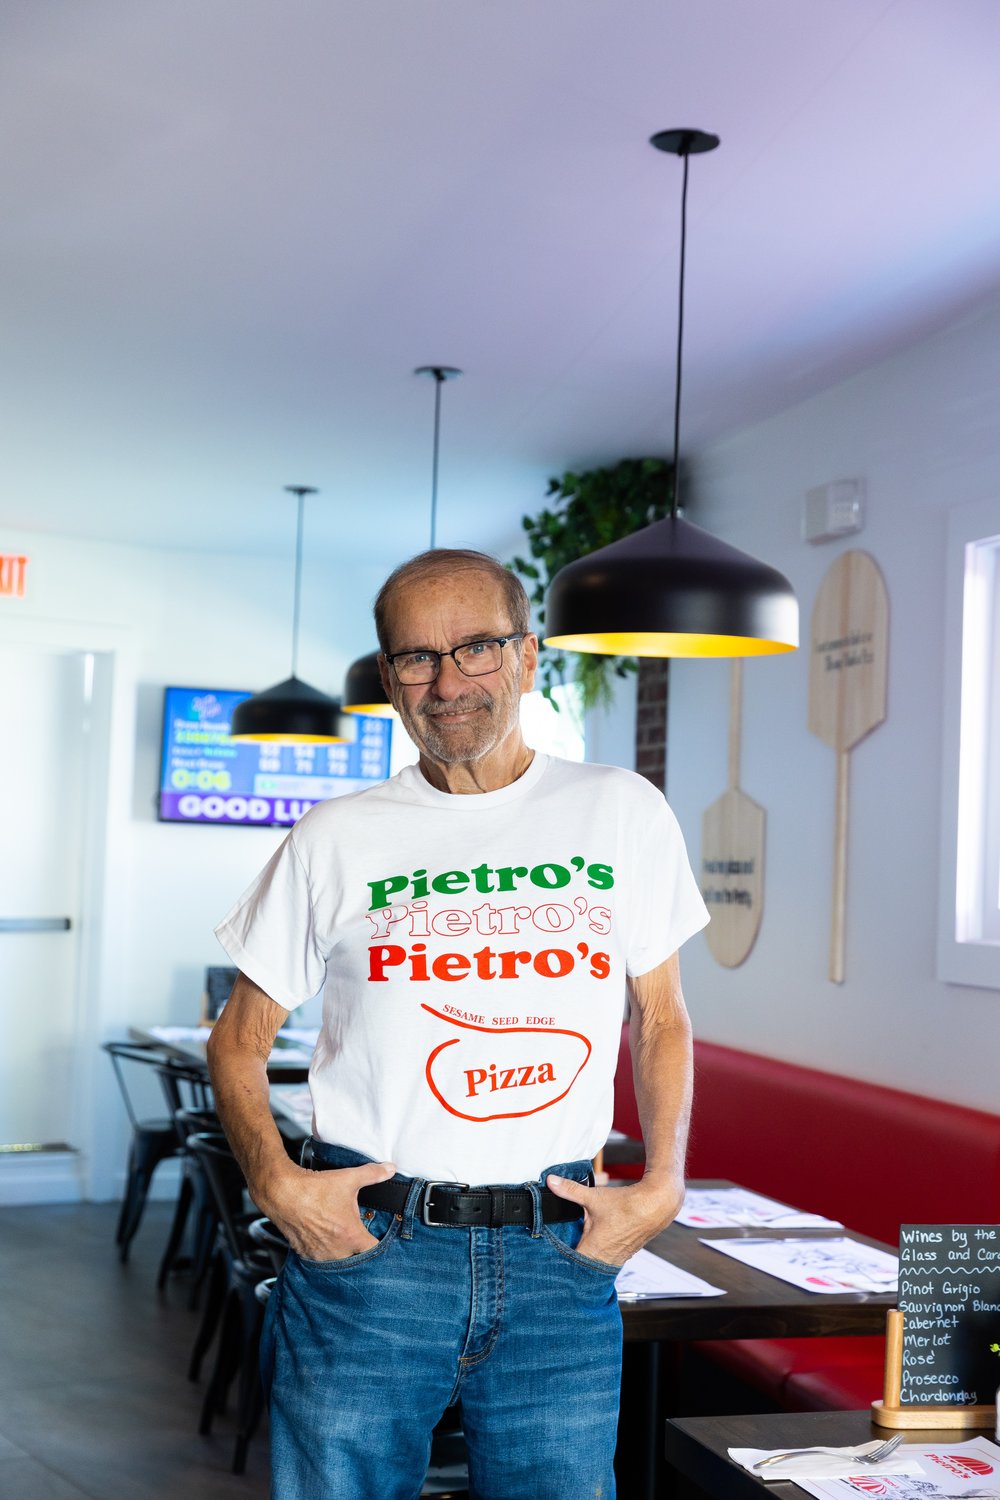 Arigo was the longtime, well-known owner of the family-run pizzeria Pietro’s. He died on Sept. 21 after a long battle with lung cancer.